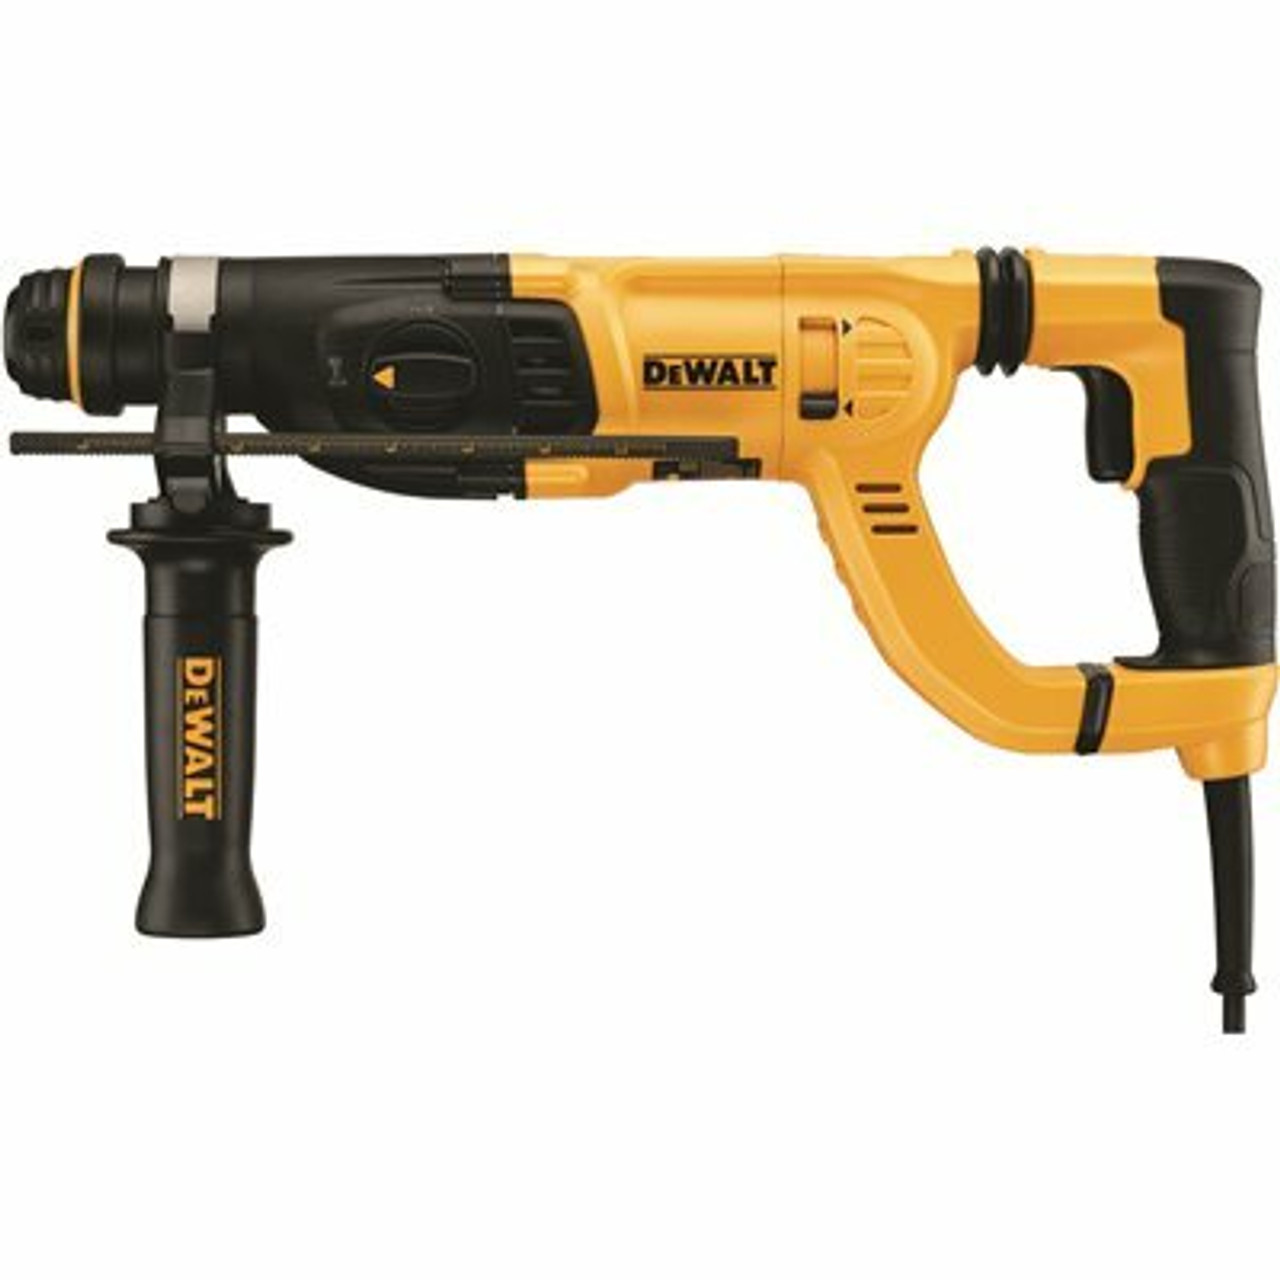 Dewalt 8 Amp 1 In. Corded Sds-Plus D-Handle Concrete/Masonry Rotary Hammer With Shocks And Case